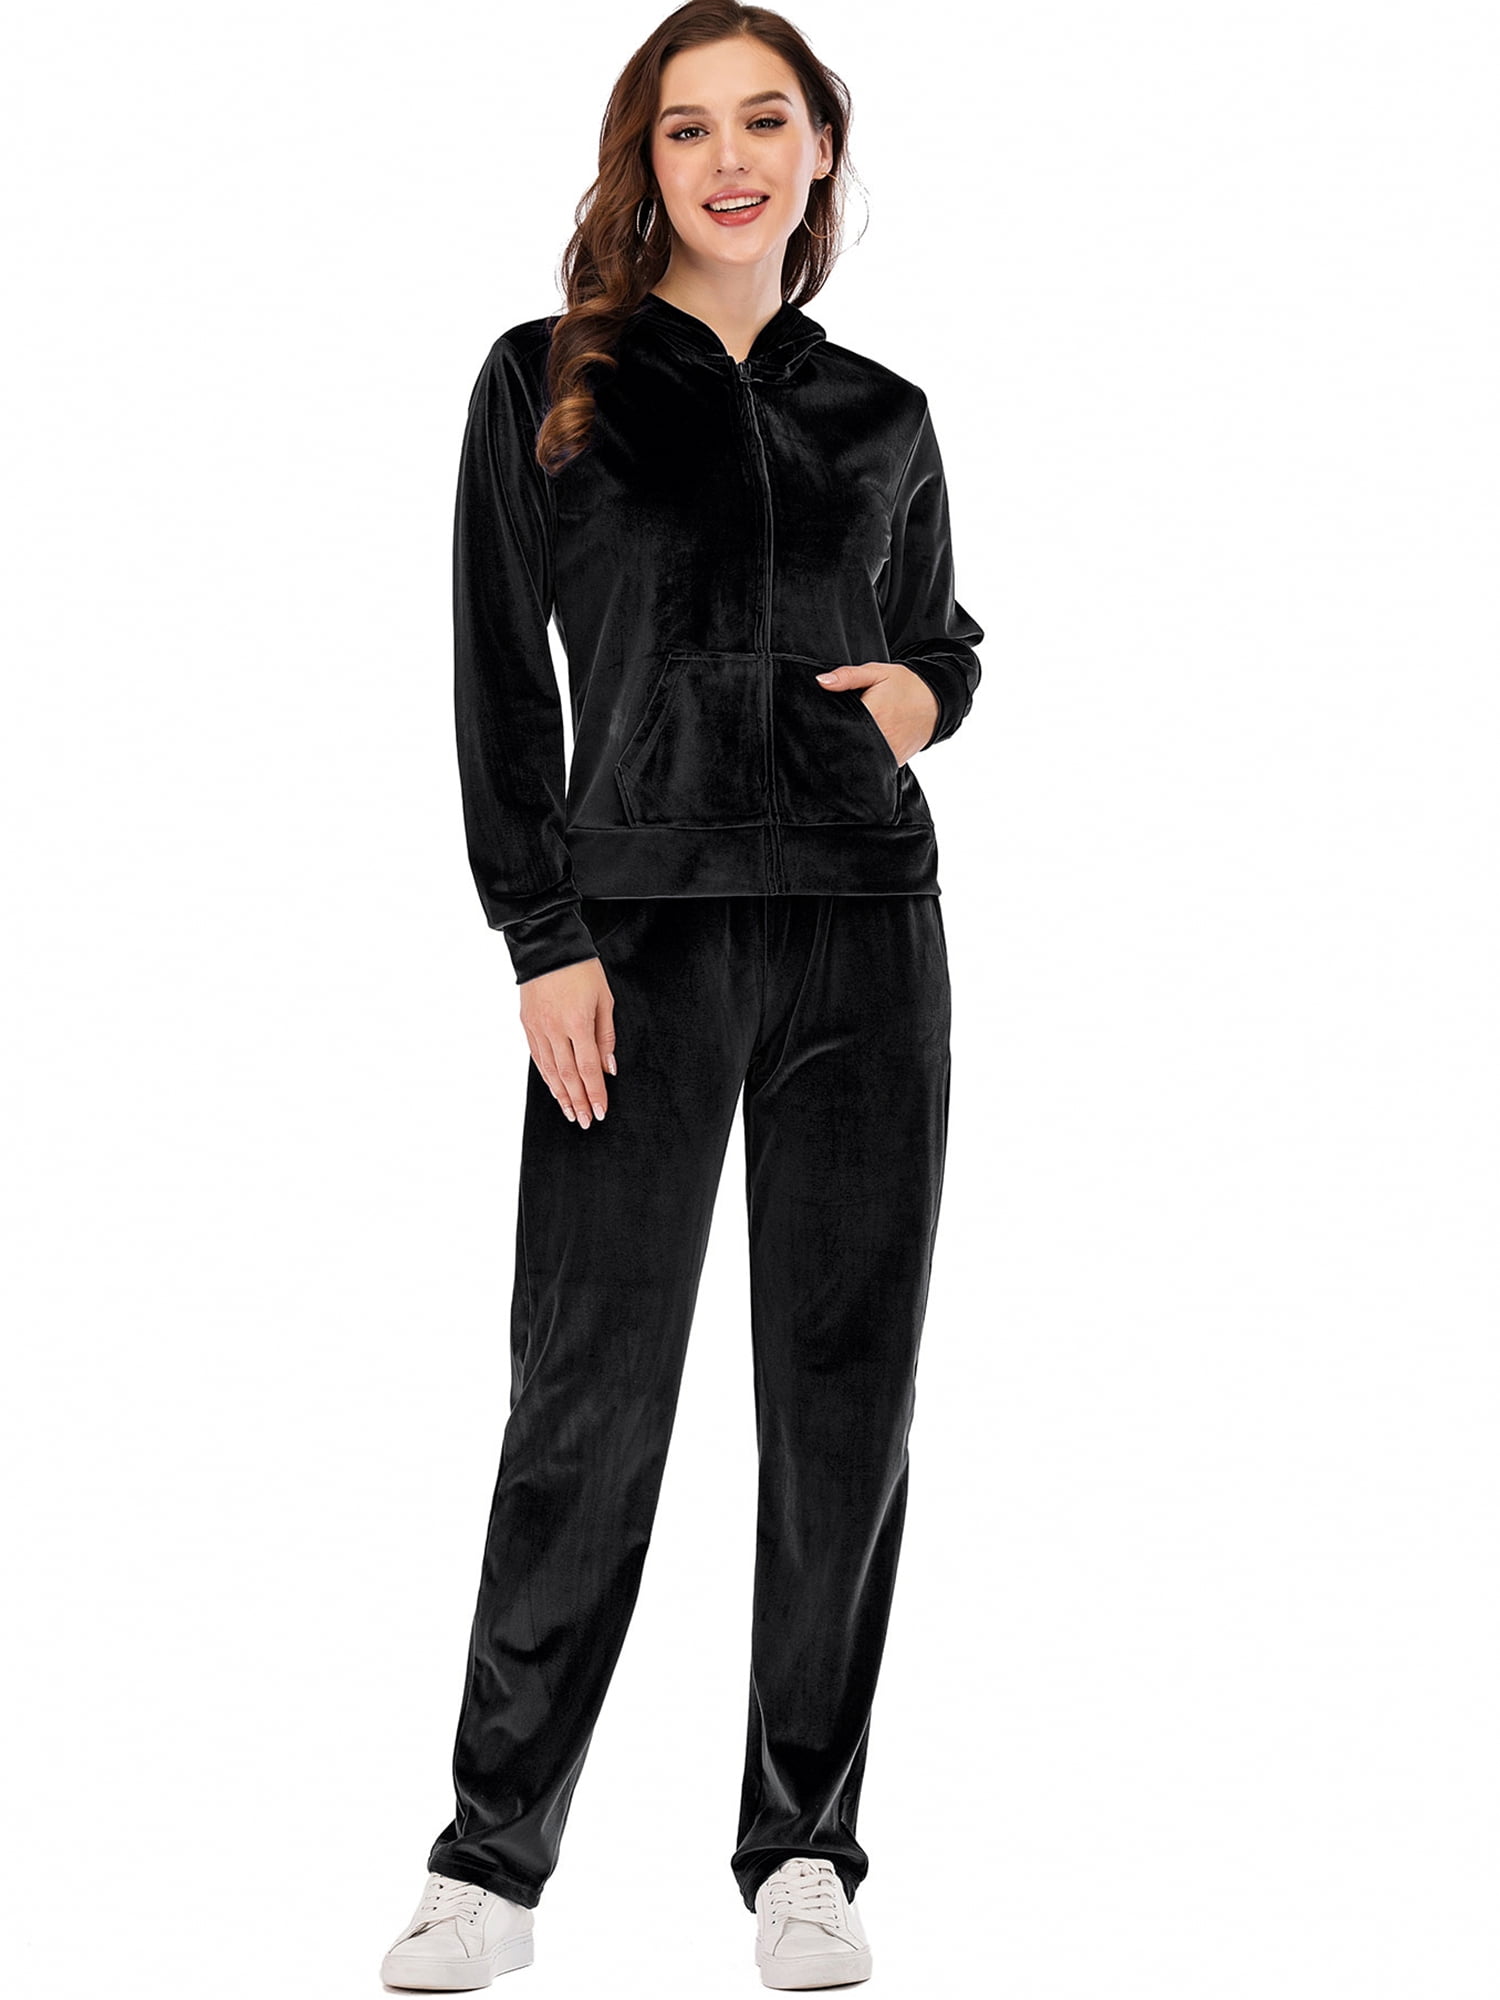 Leisure Shopping Hotouch Women S Zip Up Sweatsuit Set Velour Track Suits Long Sleeve Sweat Suits